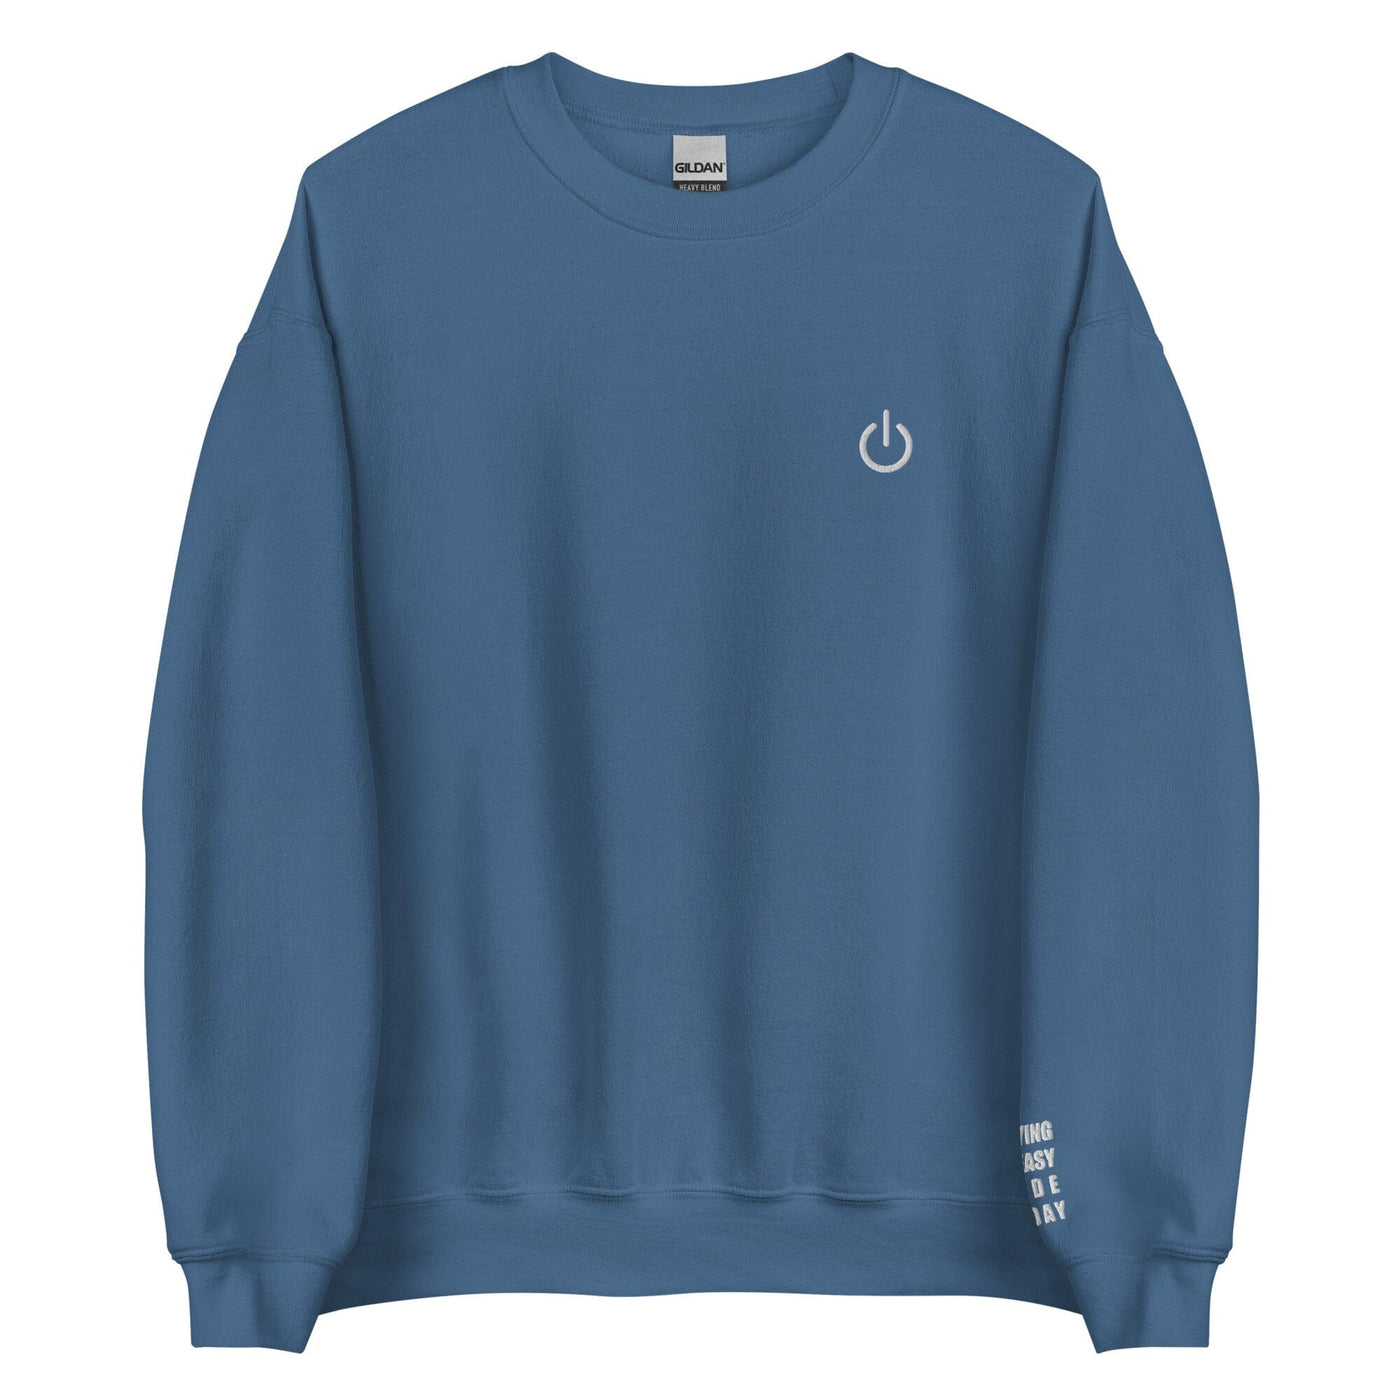 Playing on Easy Mode Today | Unisex Sweatshirt | Gamer Affirmations Threads & Thistles Inventory Indigo Blue S 